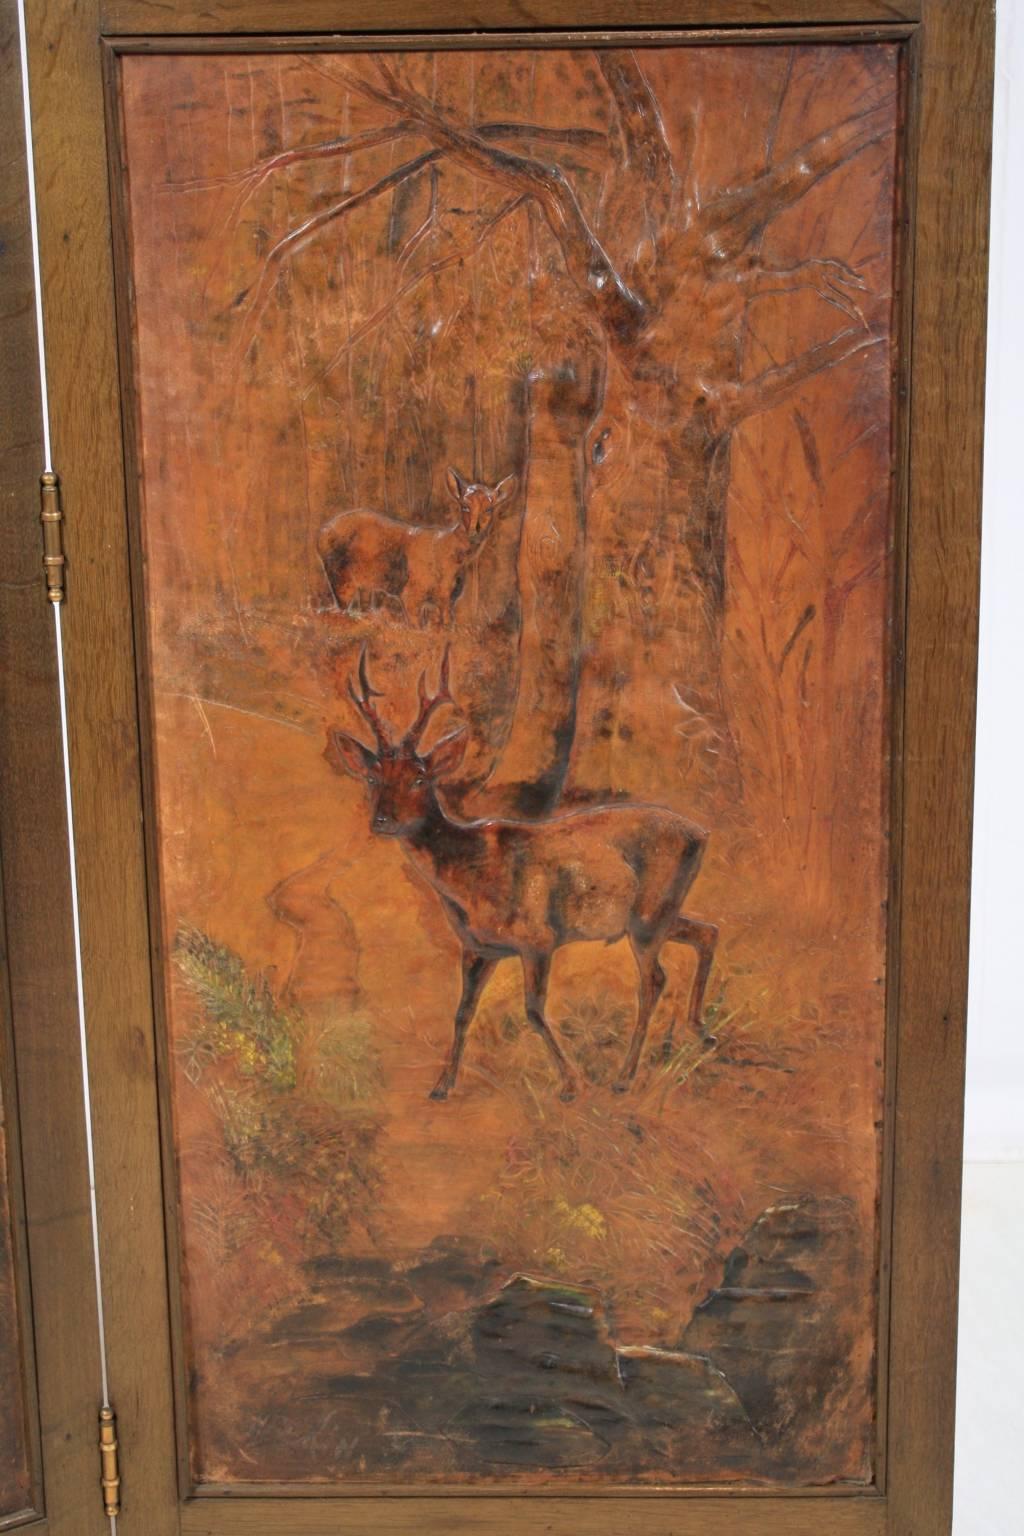 The lower front panels are woodland scenes featuring stag and deer in pressed leather with hand coloring. The upper panels are pressed copper and feature scenes with hunting dogs and their game. The backside of each screen is equally as beautiful